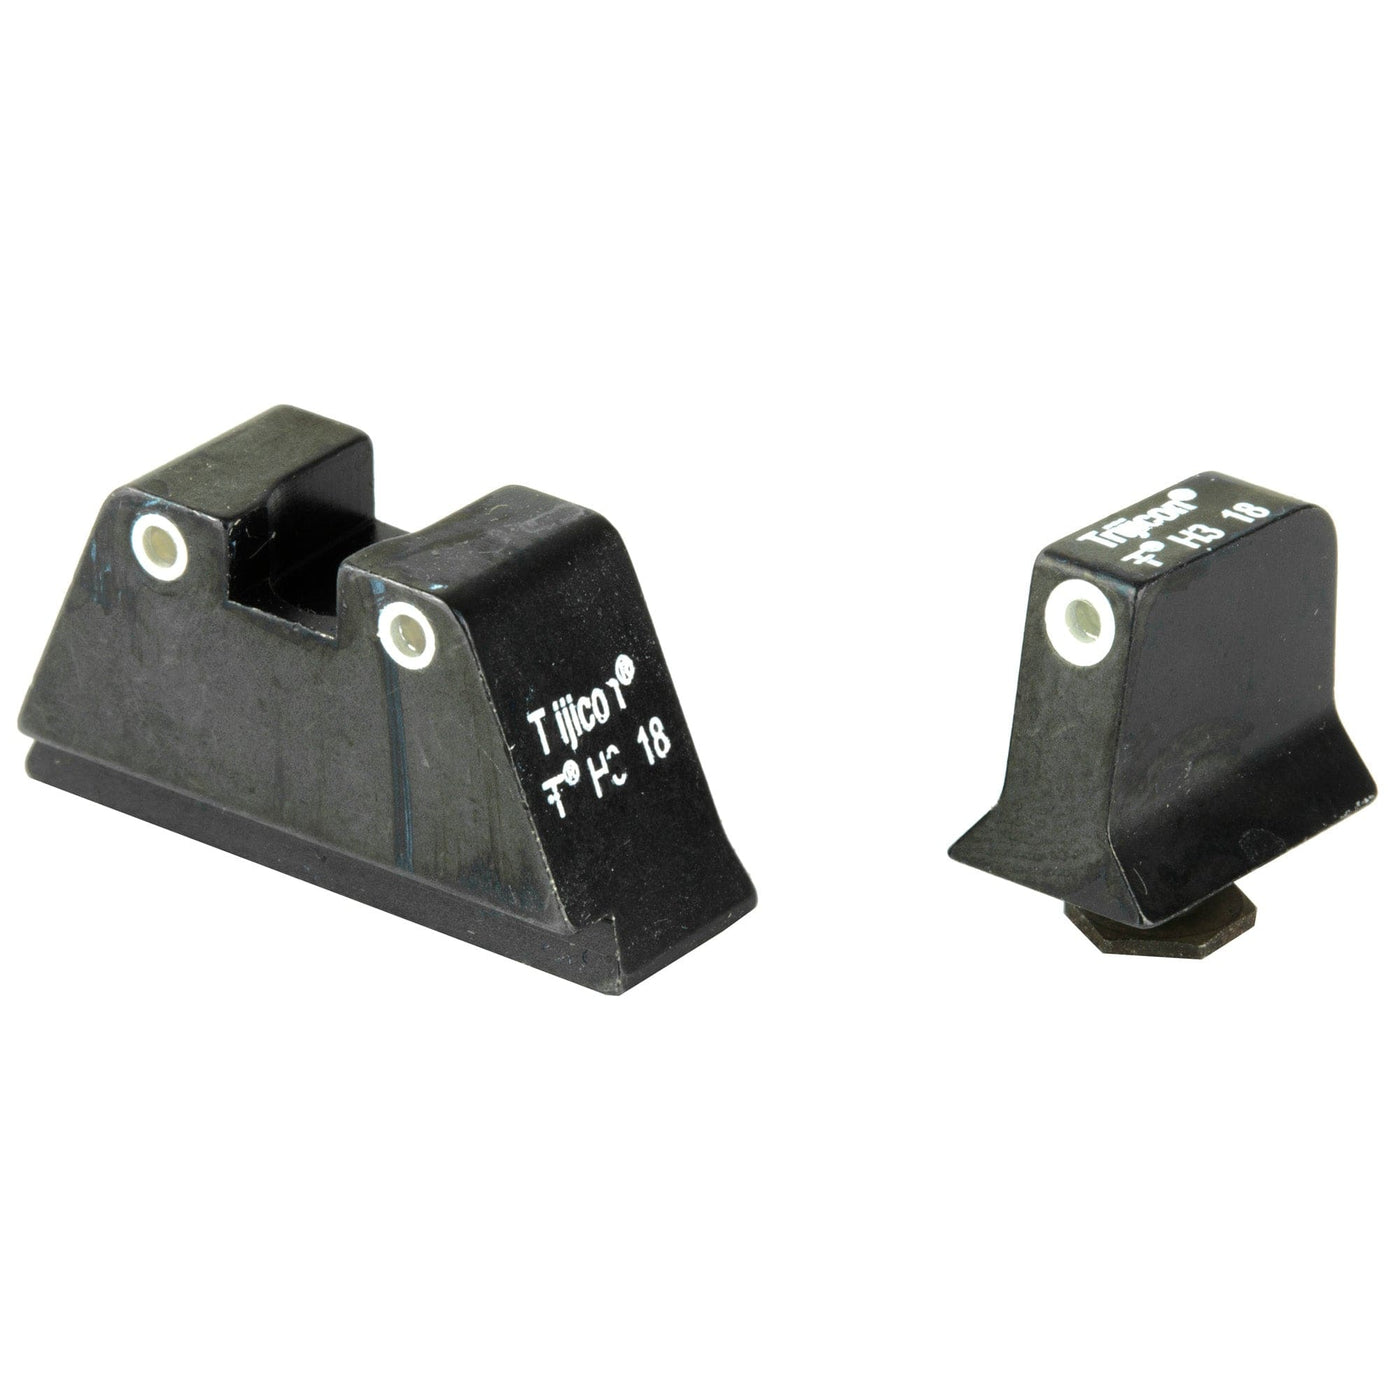 Trijicon Trijicon Sup Ns Grn/org For Glk 9mm Sights/Lasers/Lights